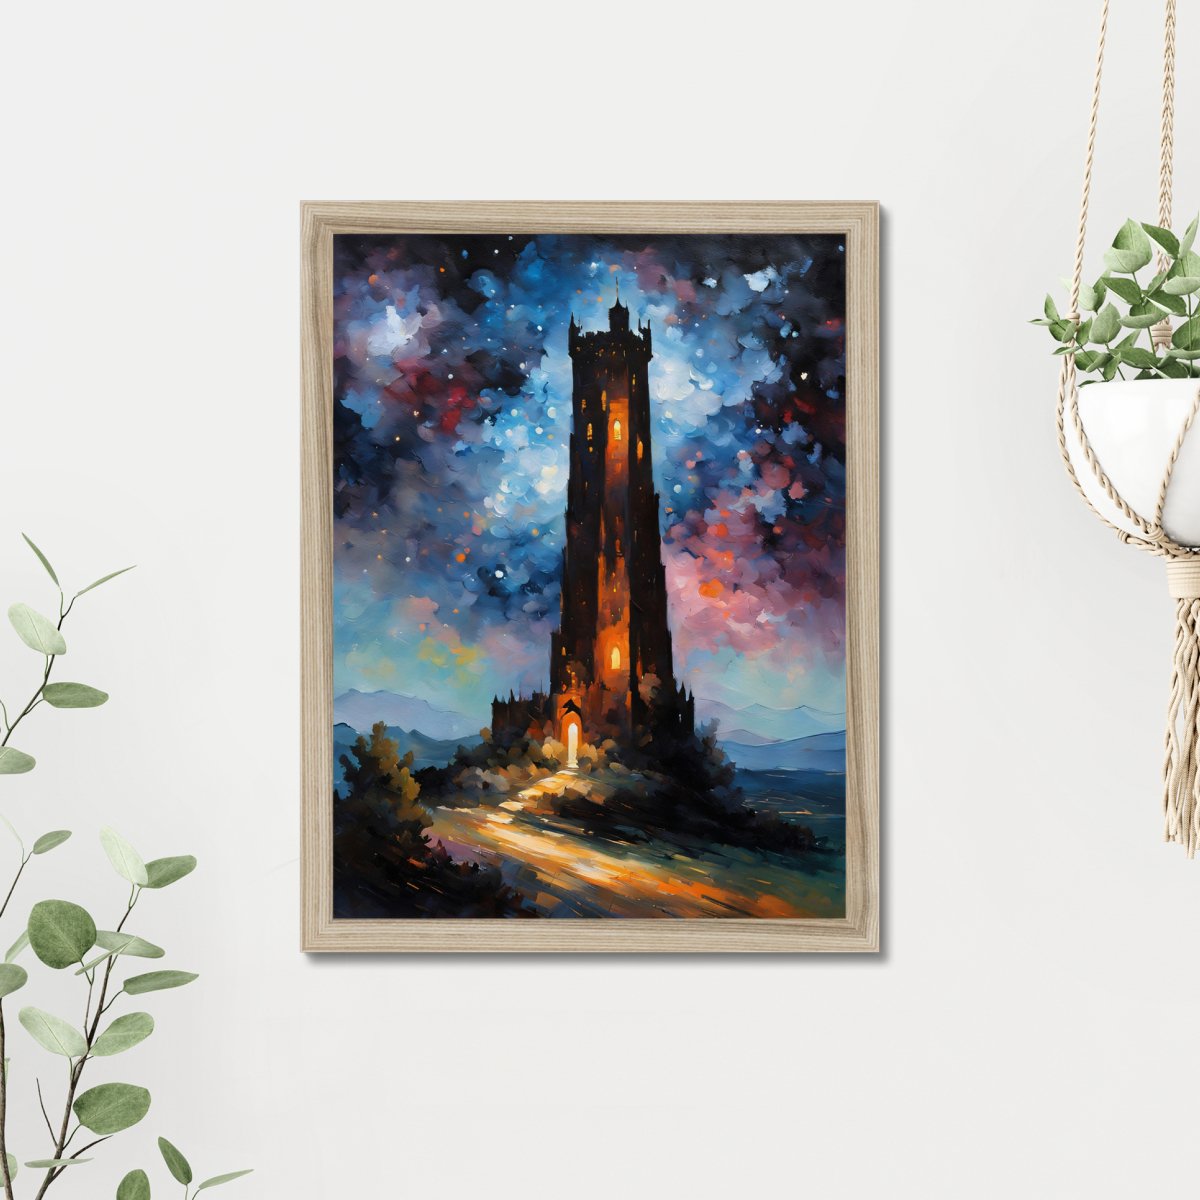 Dreadful stars tower - Art print - Poster - Ever colorful